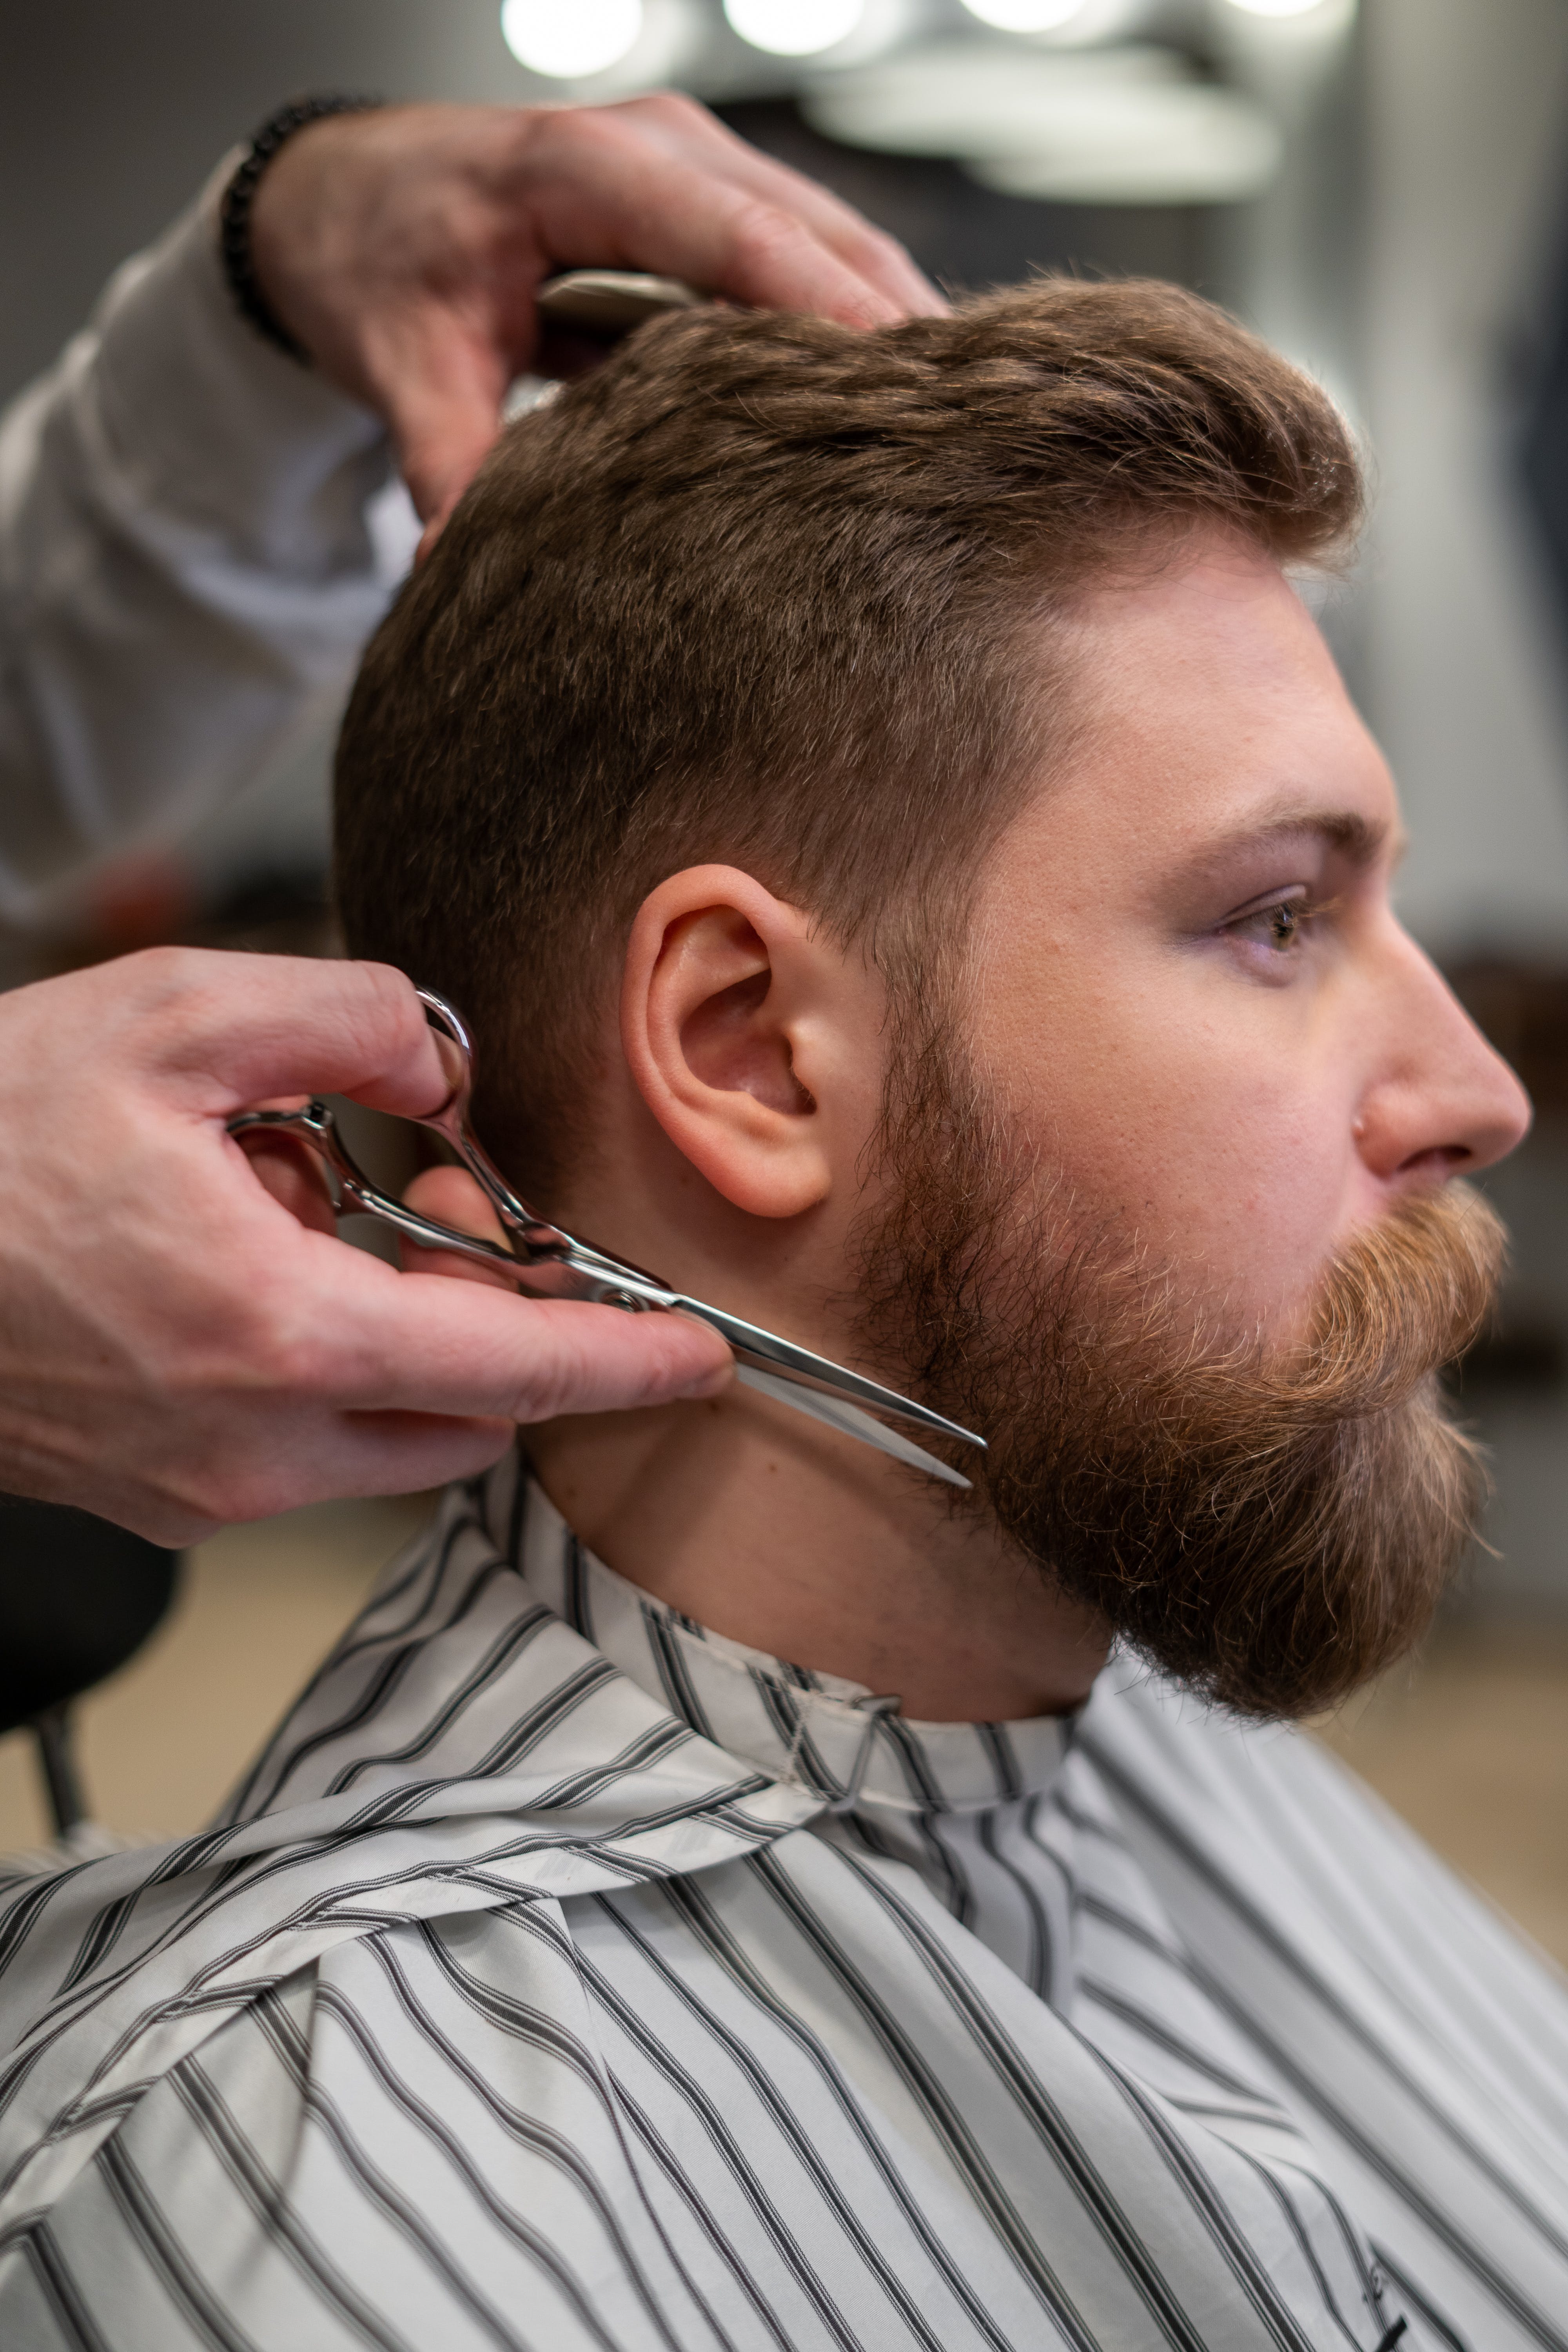 A Complete Overview on Sports and Barbershop Booking System